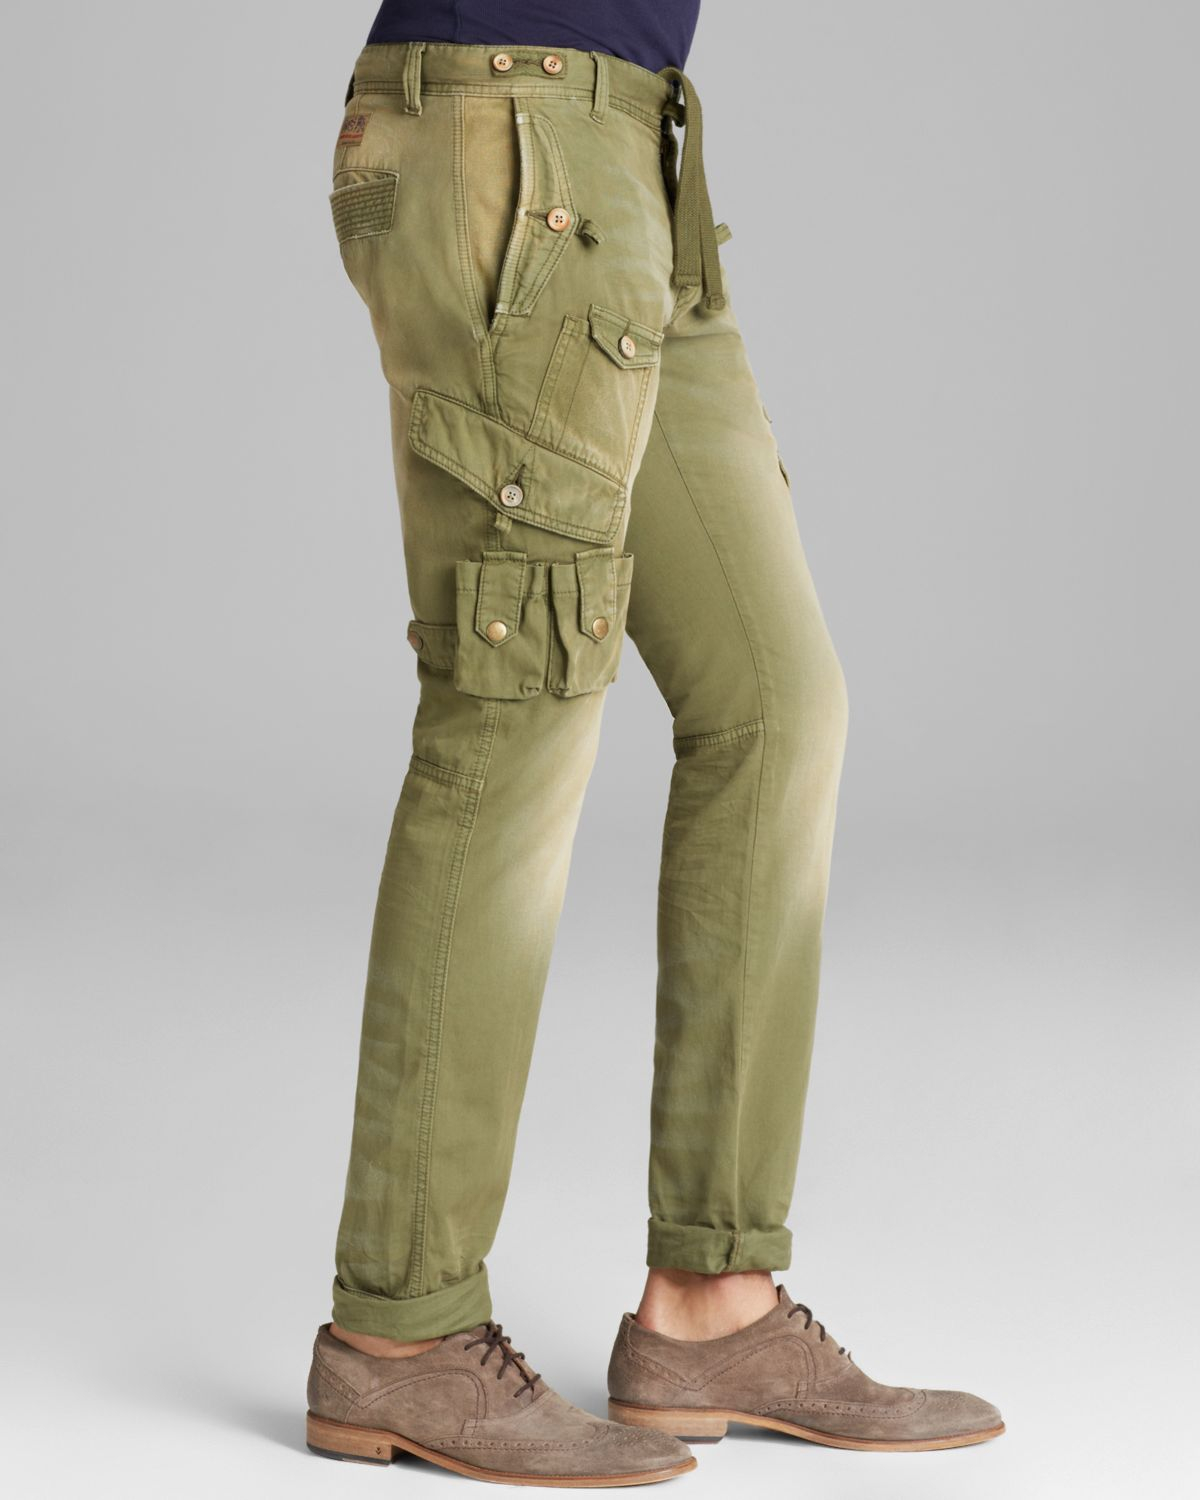 Lyst - Prps Cargo Cord Pants in Green for Men